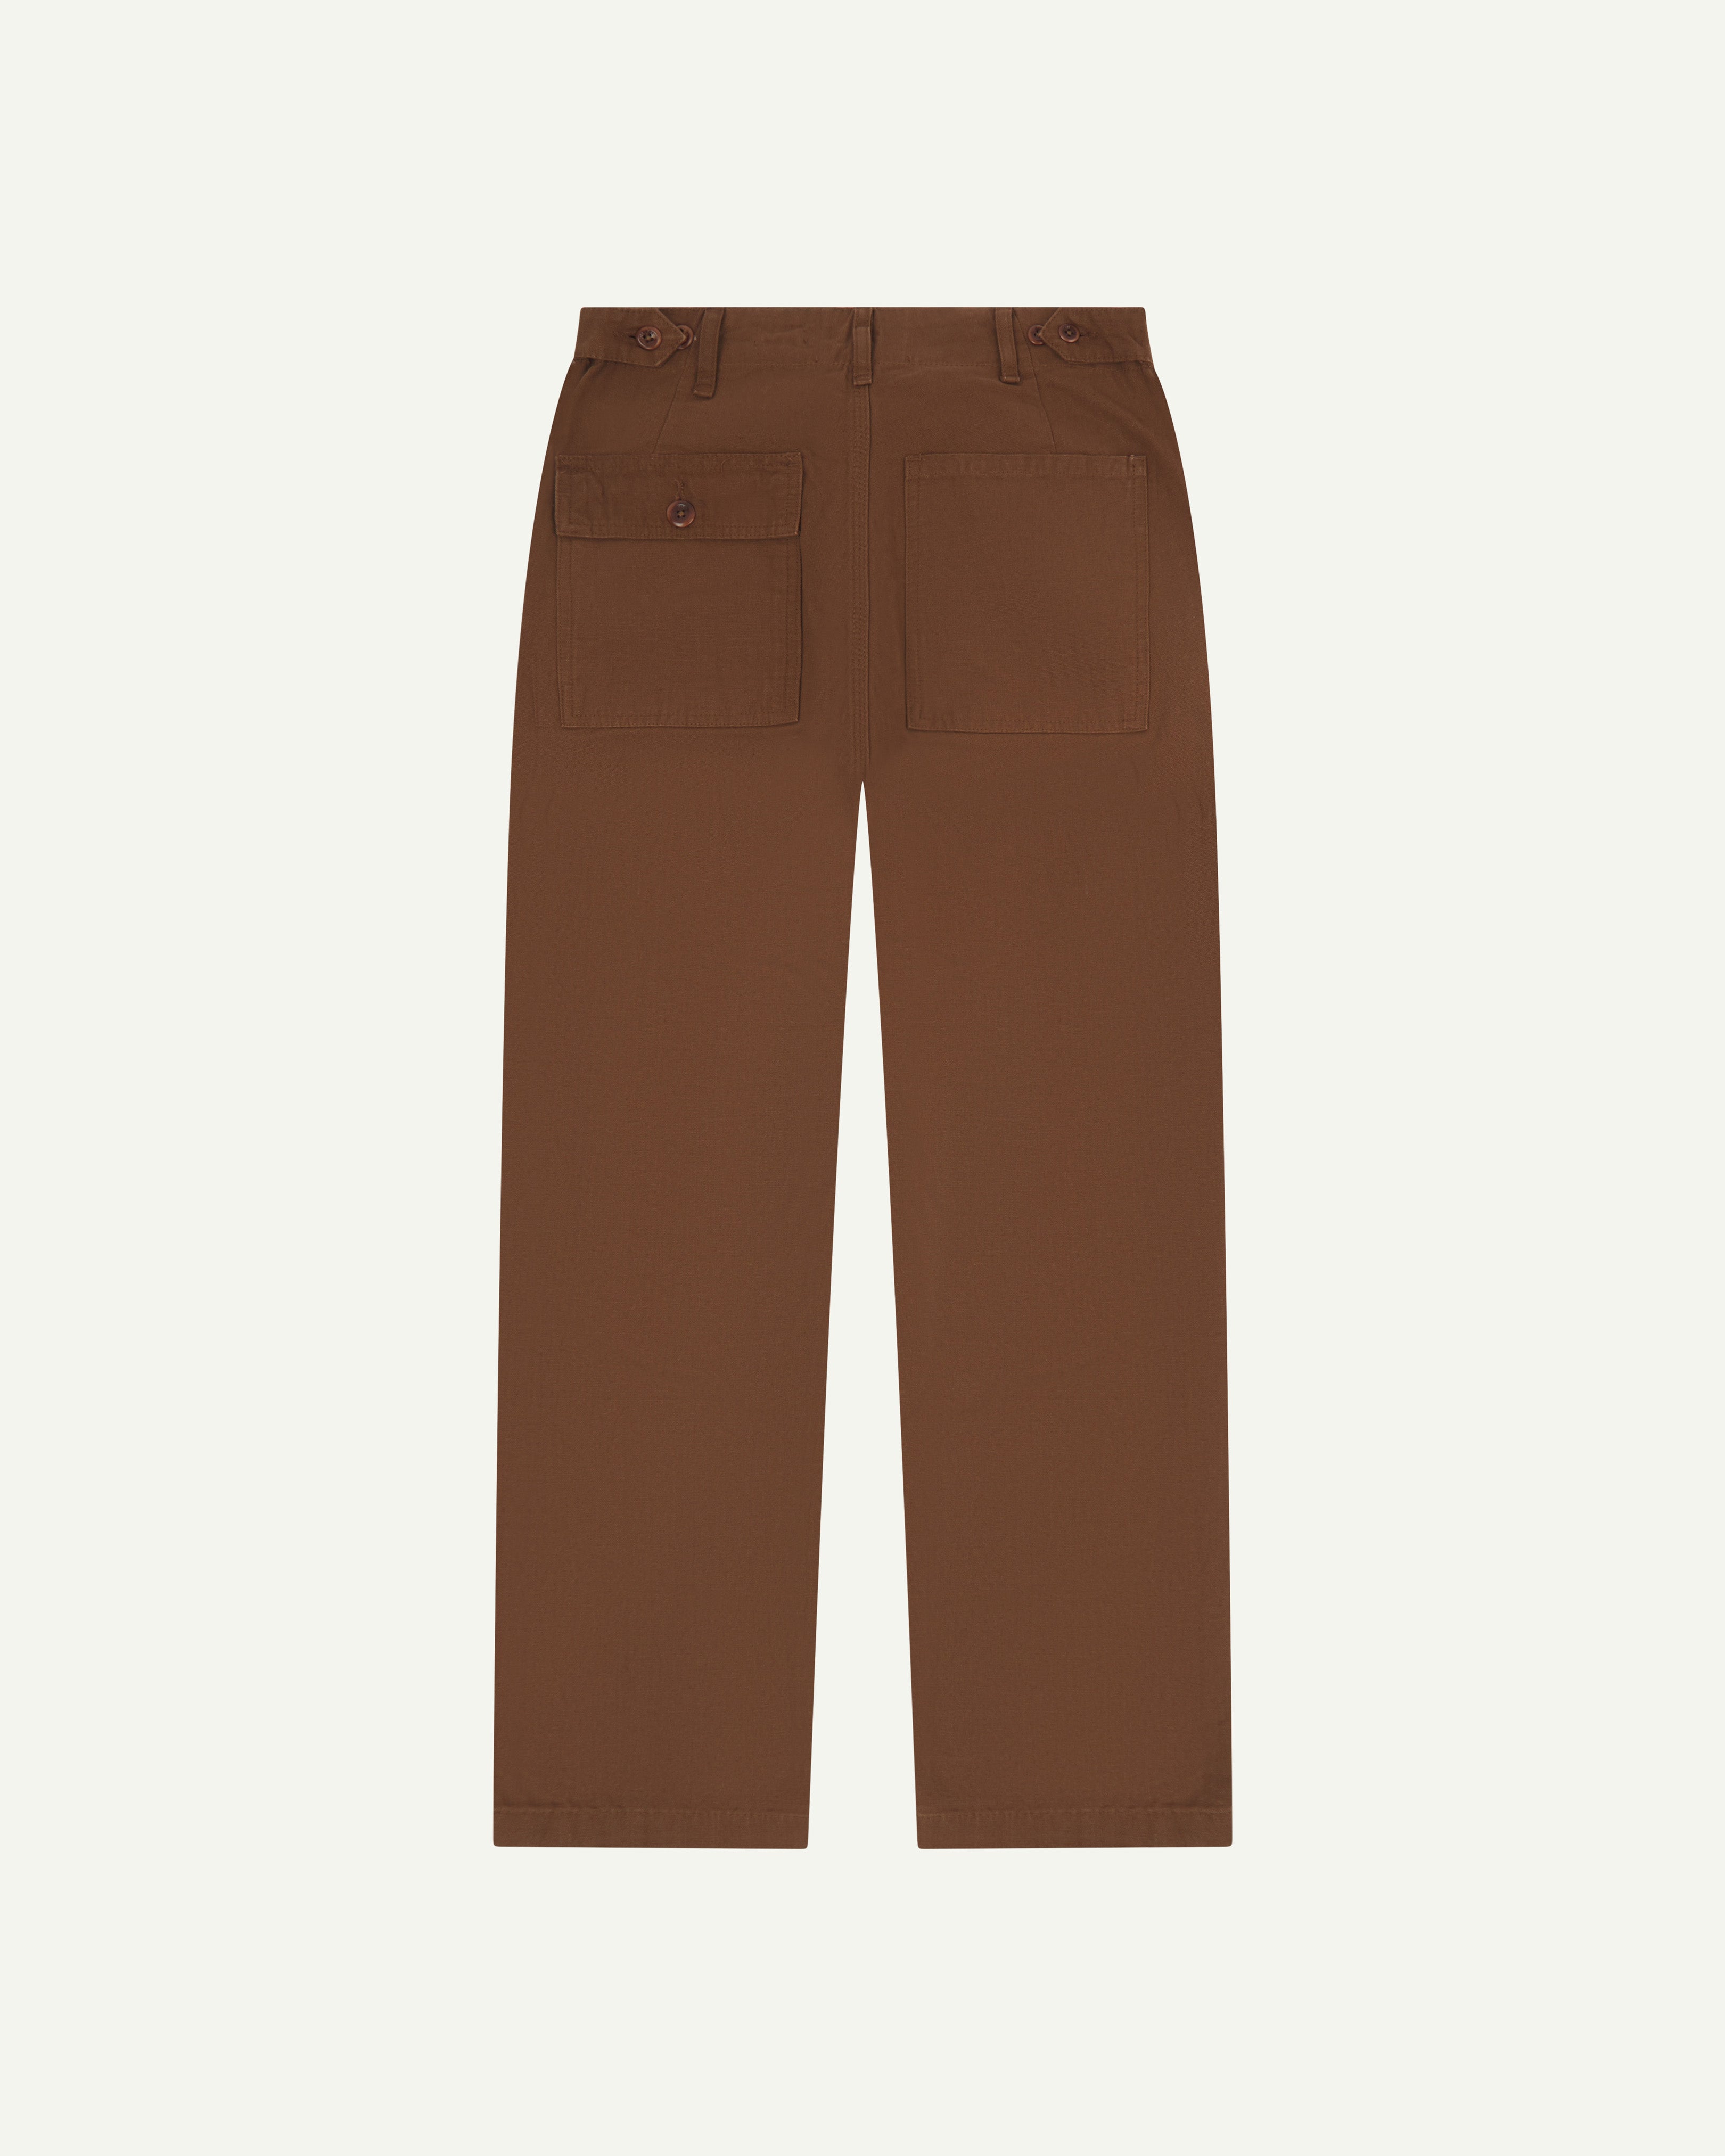 Flat view of back of #5005 Uskees men's organic cotton 'chocolate' coloured trousers on white background.